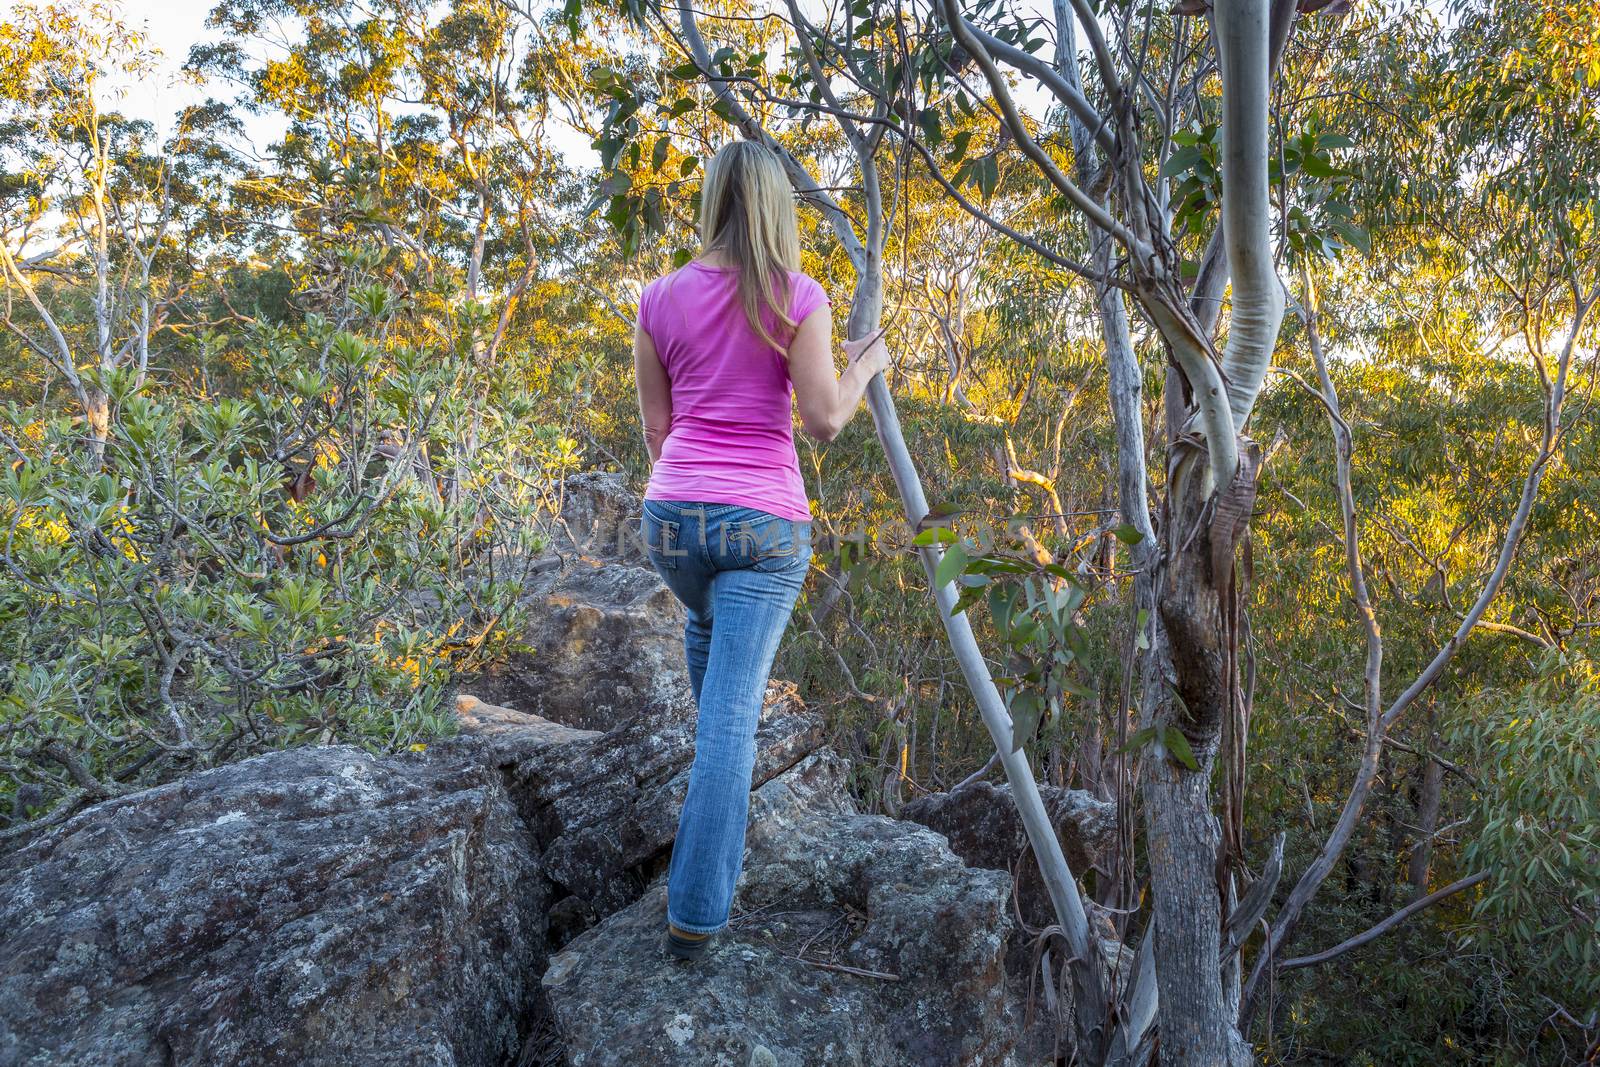 Standing high up on rock ledge  in the tree canopy by lovleah